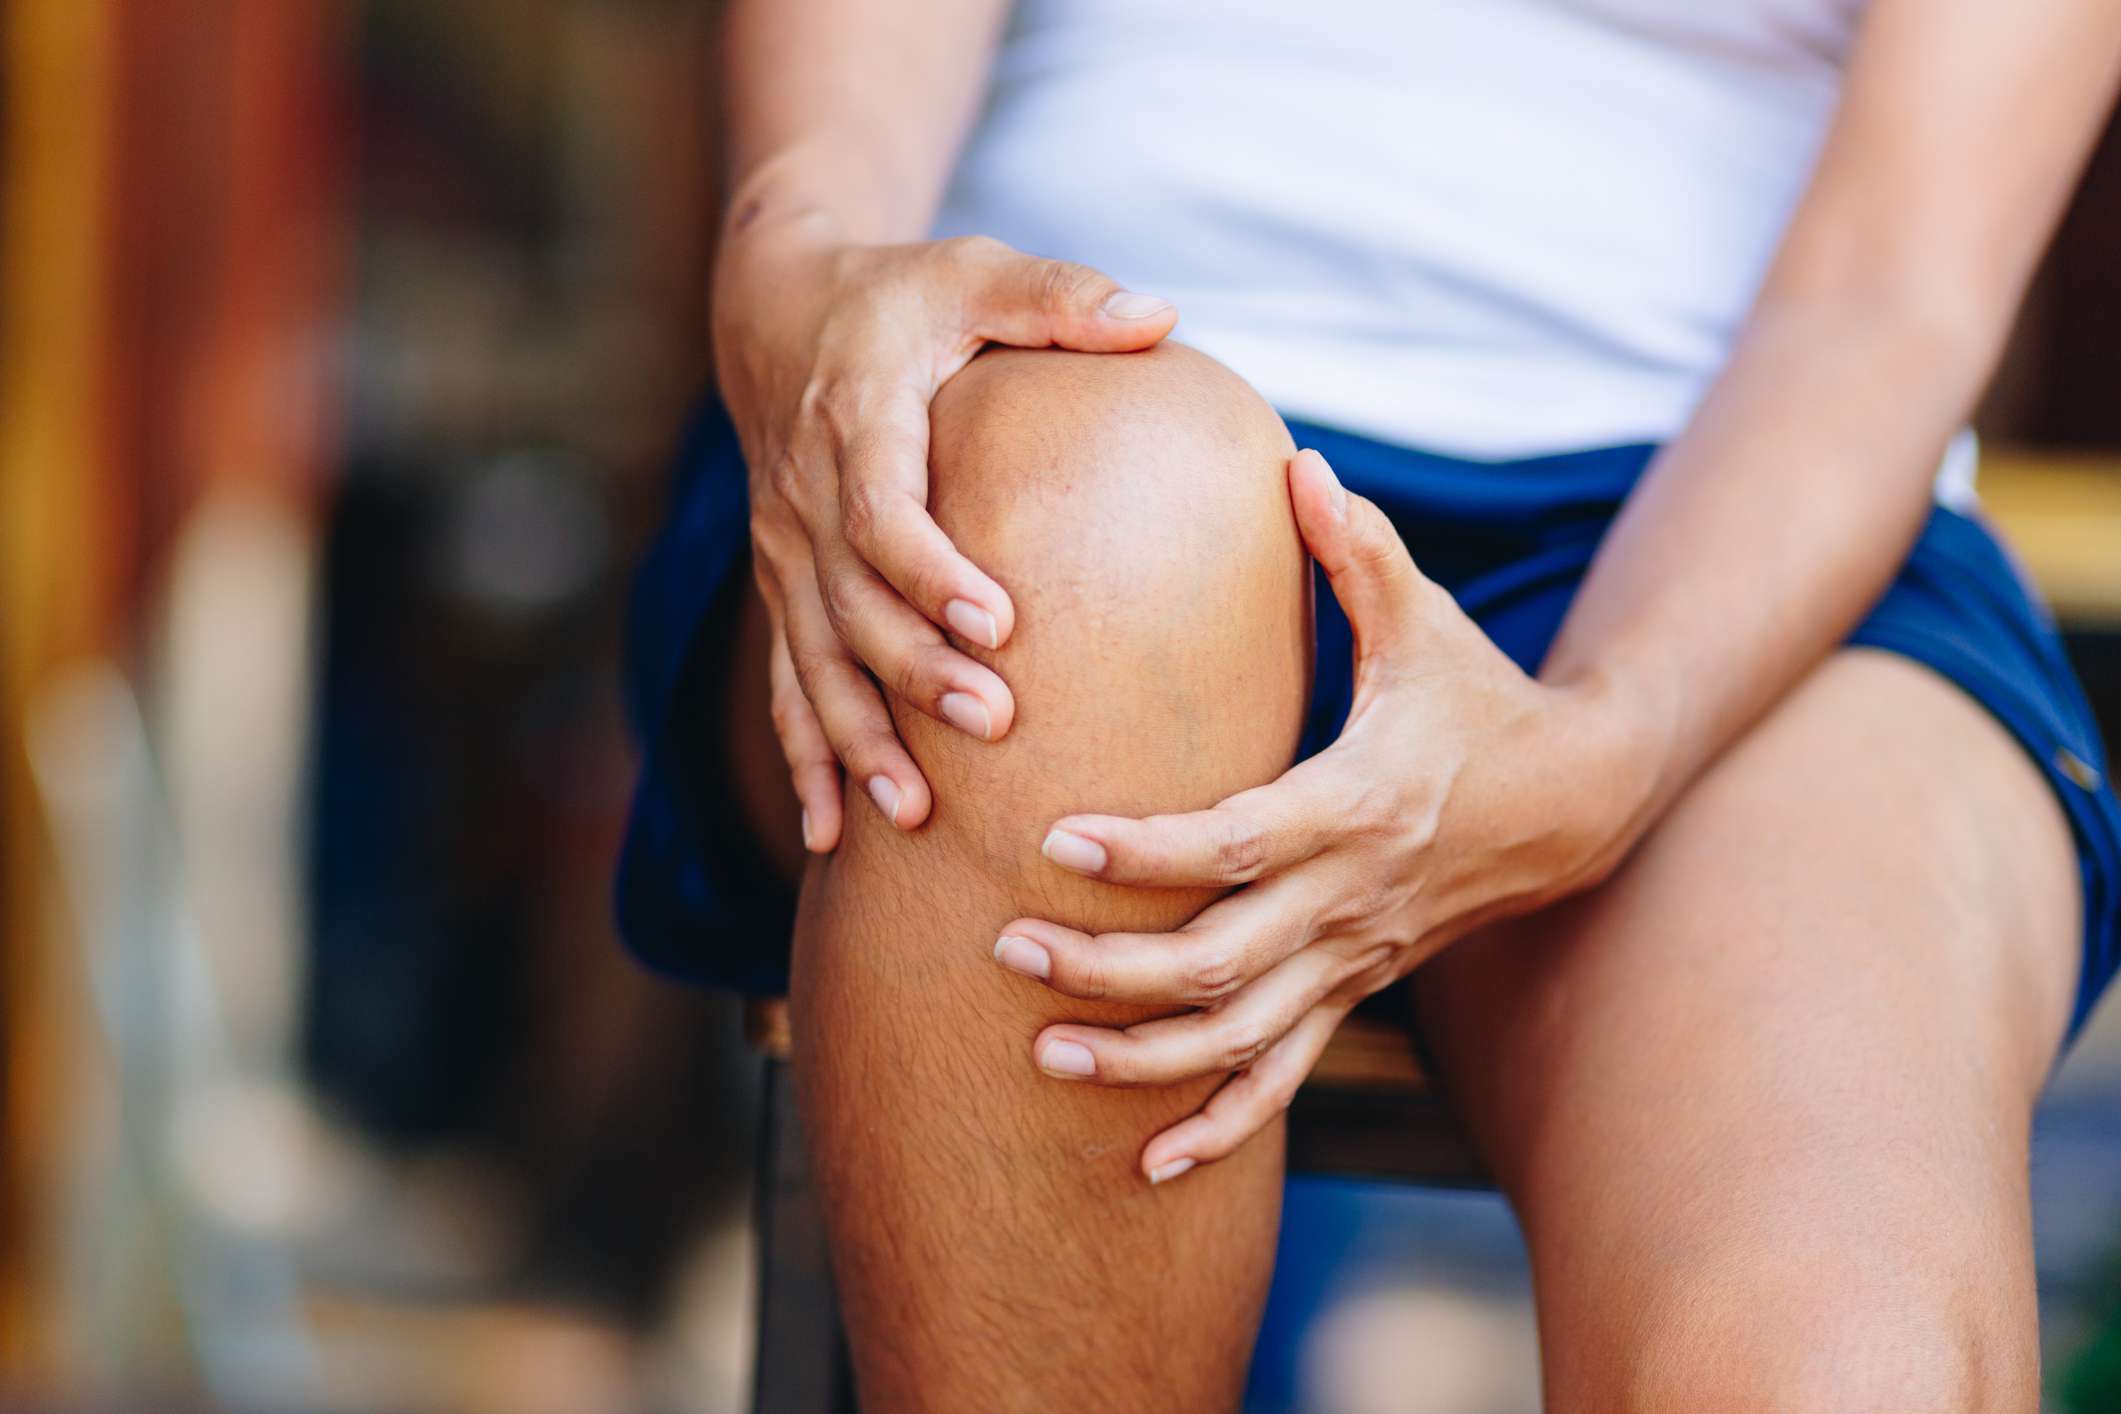 How to Get Rid of Fluid on the Knee